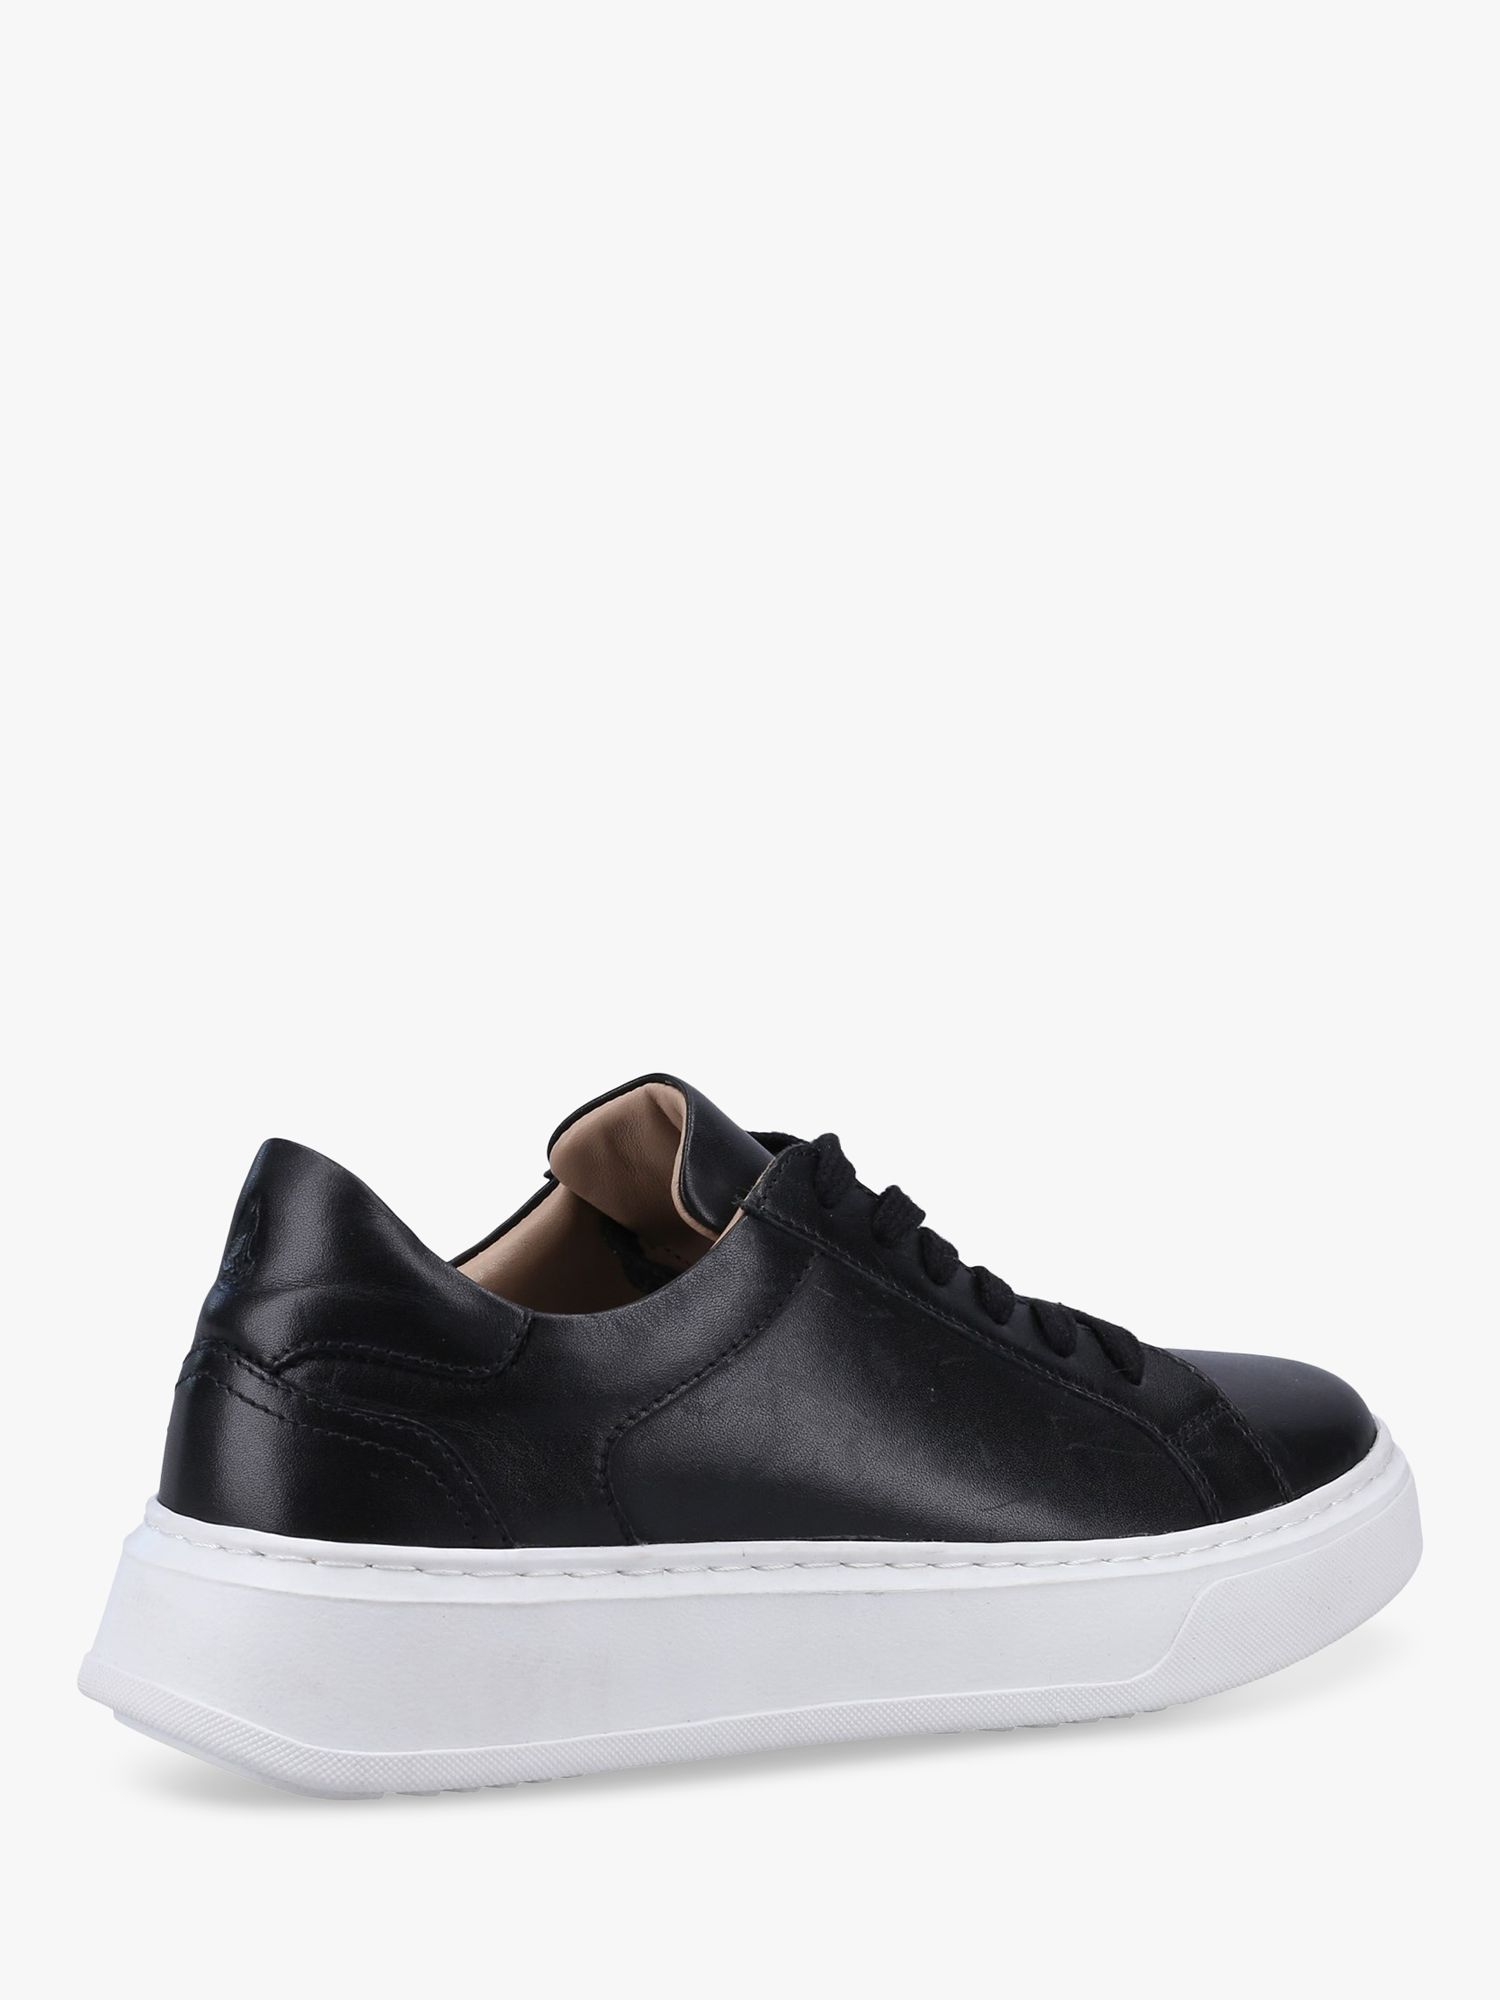 Hush Puppies Camille Lace-Up Leather Trainers, Black at John Lewis ...